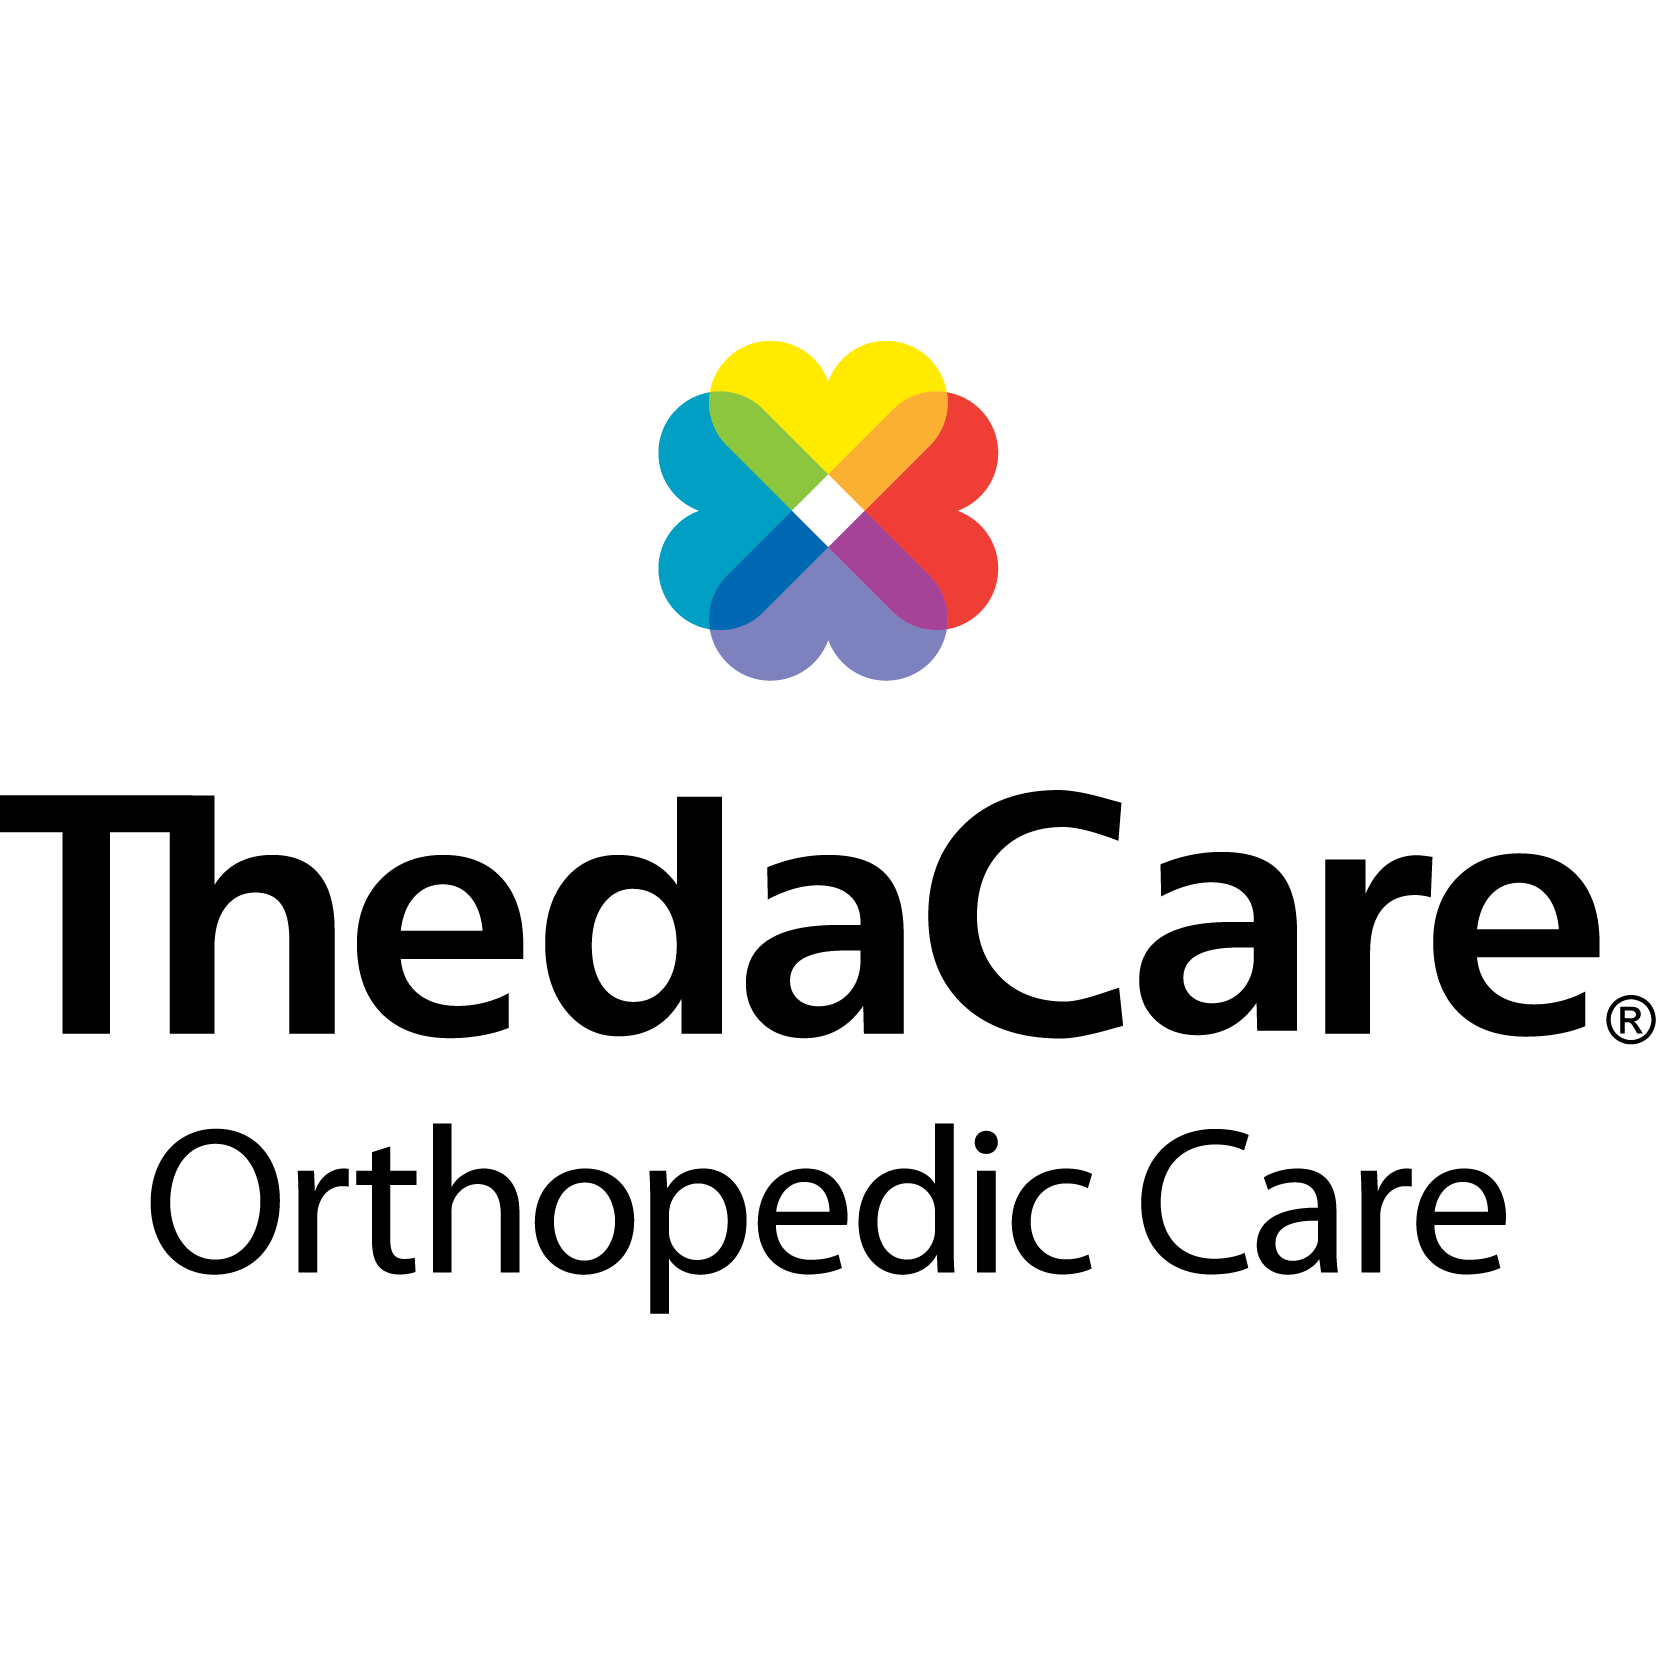 ThedaCare Orthopedic Care